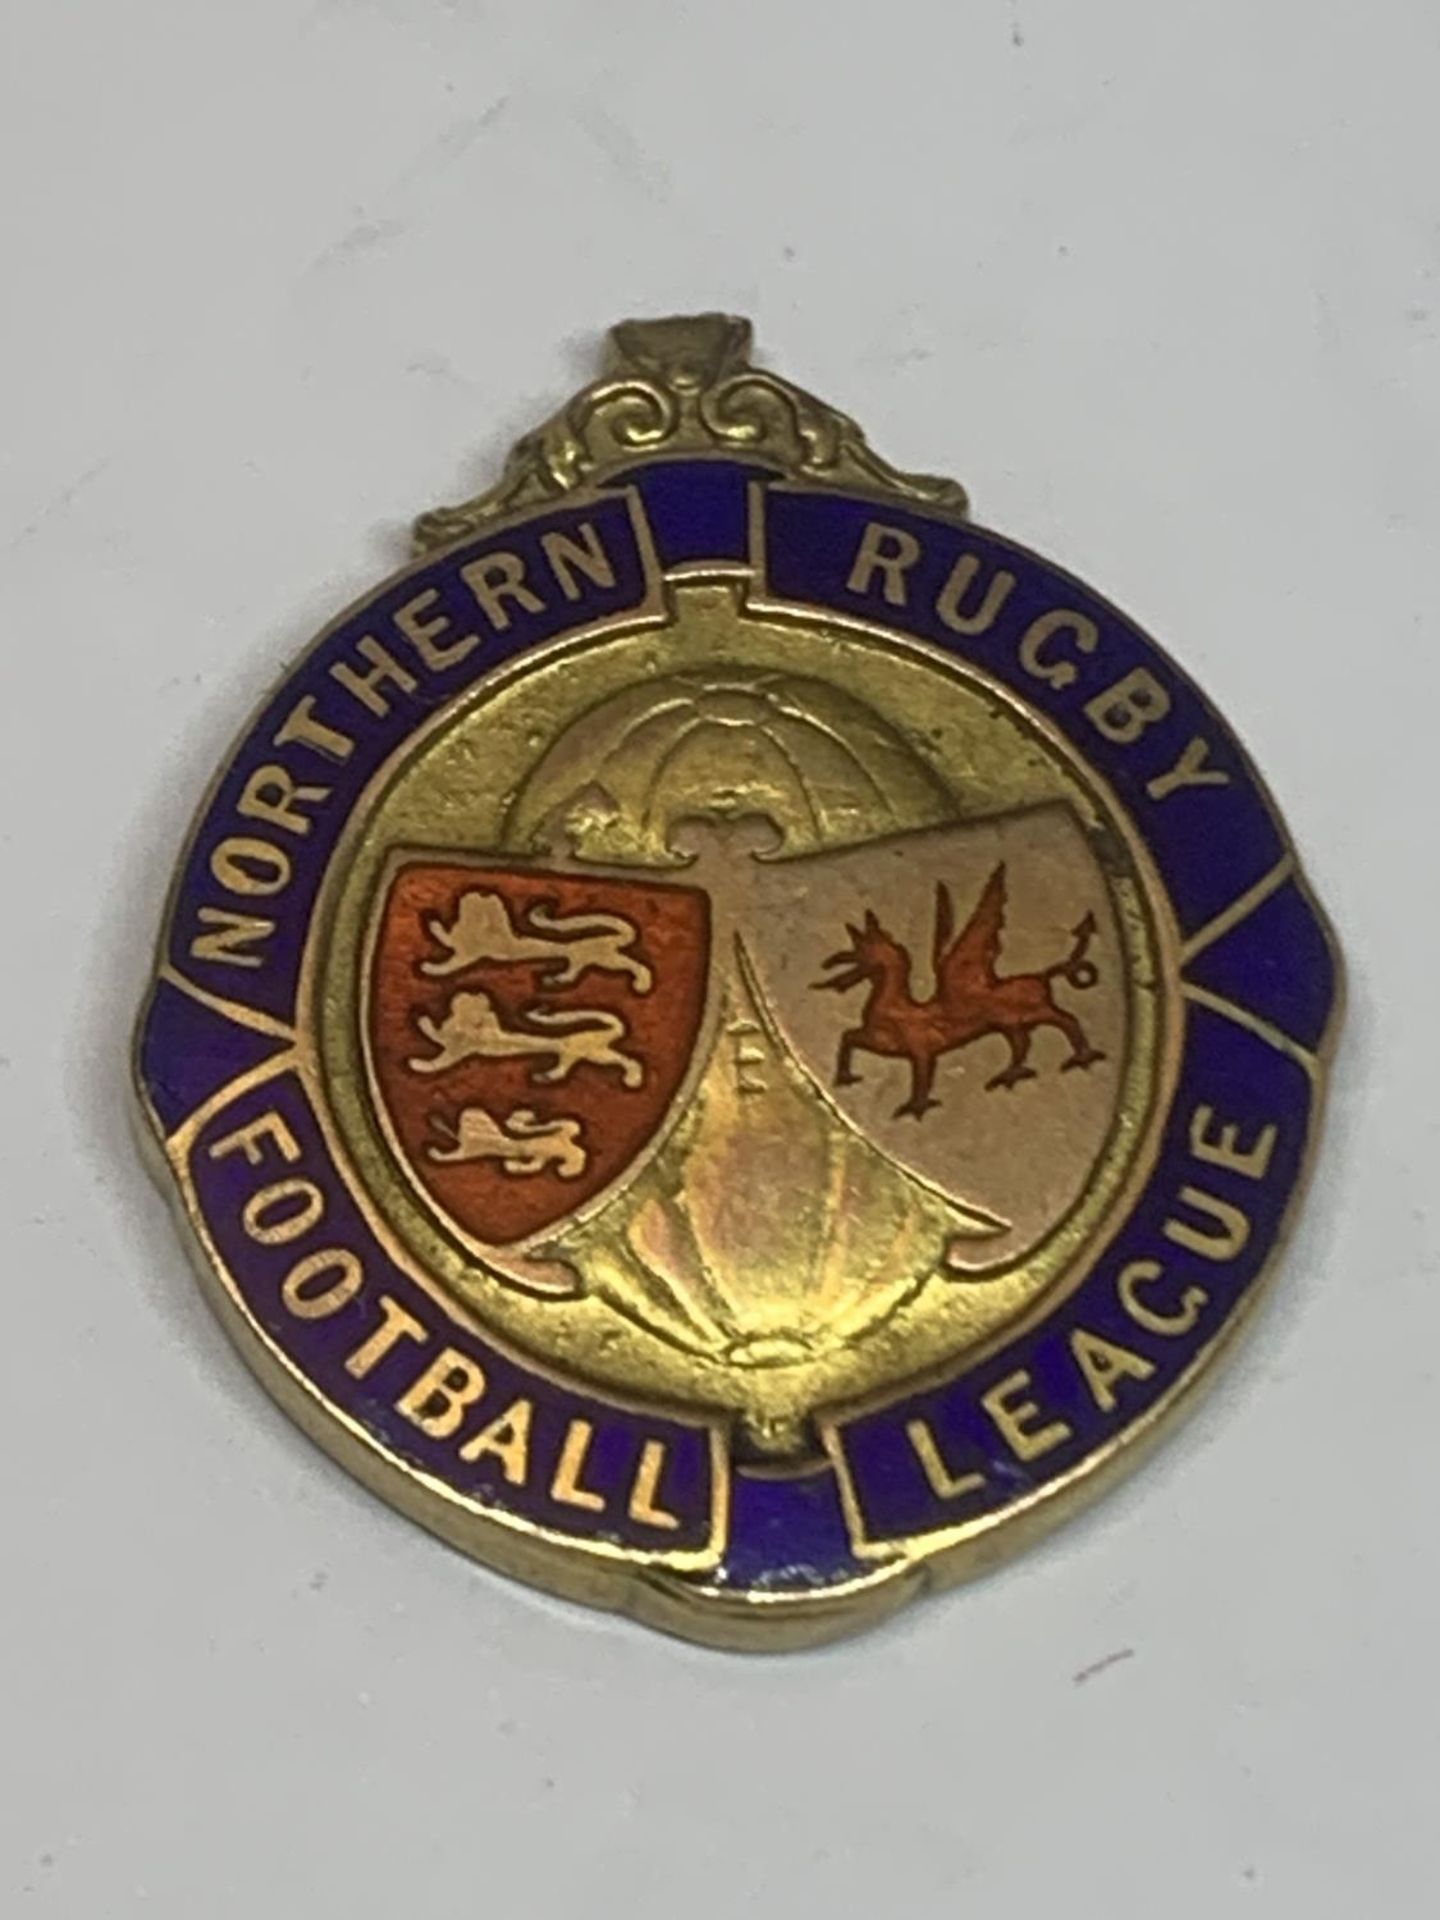 A HALLMARKED 9 CARAT GOLD NORTHERN RUGBY LEAGUE FOOTBALL MEDAL ENGRAVED WINNERS 1932-33 SALFORD F.C,